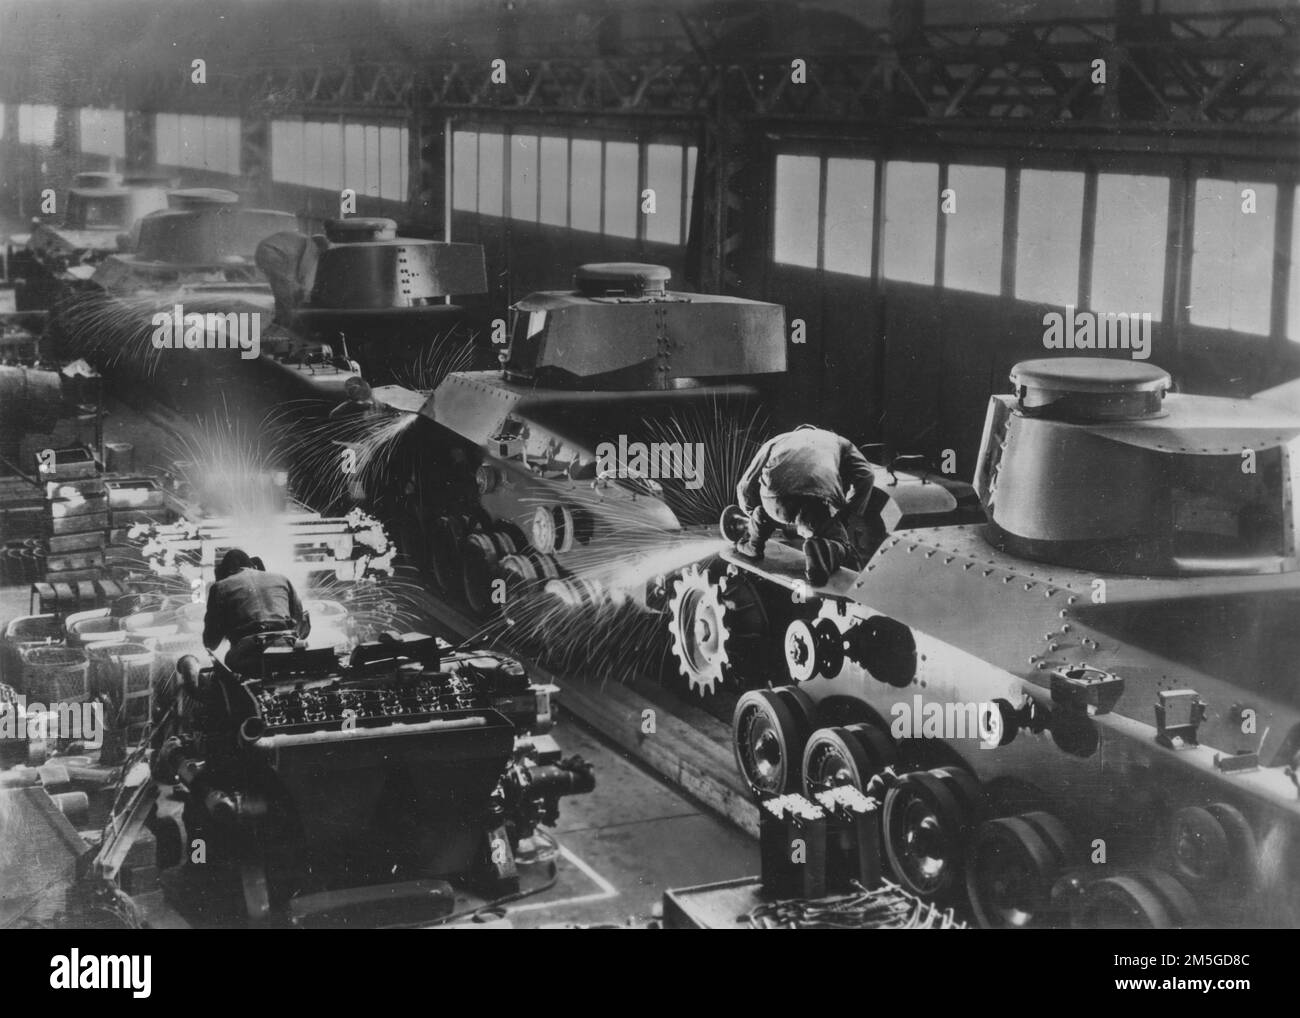 Pacific War, 1941-1945. Japanese Home Front - Japanese civilian workers employed by Mitsubishi Heavy Industries labor away on a medium tank production line, January 1944. Stock Photo